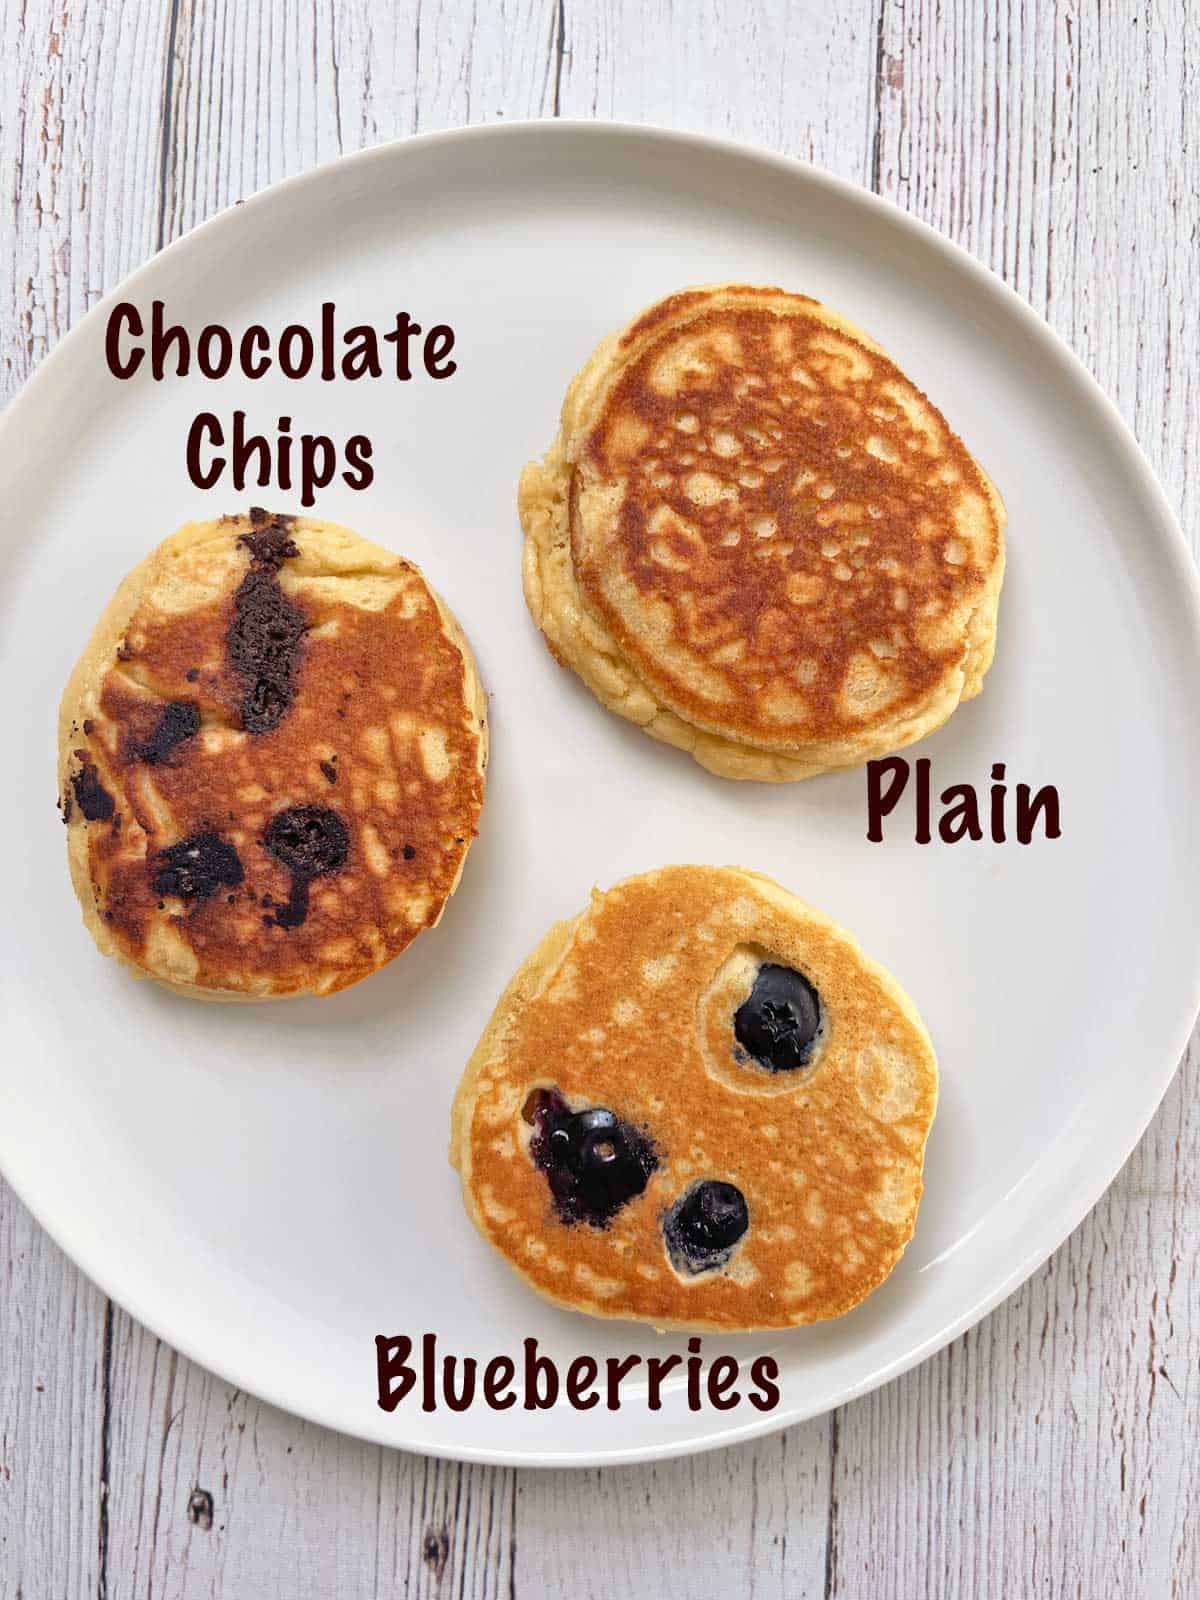 Three types of almond flour pancakes: plain, with blueberries, and with chocolate chips.